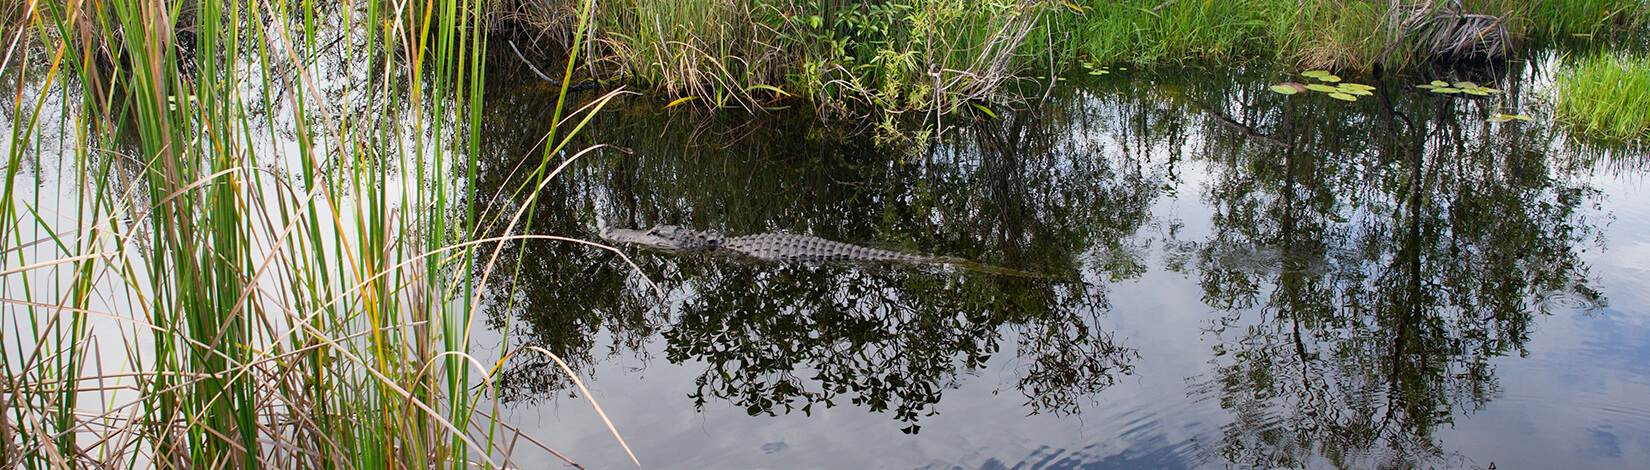 An alligator and aquatic vegetation in a freshwater pond in the Everglades.